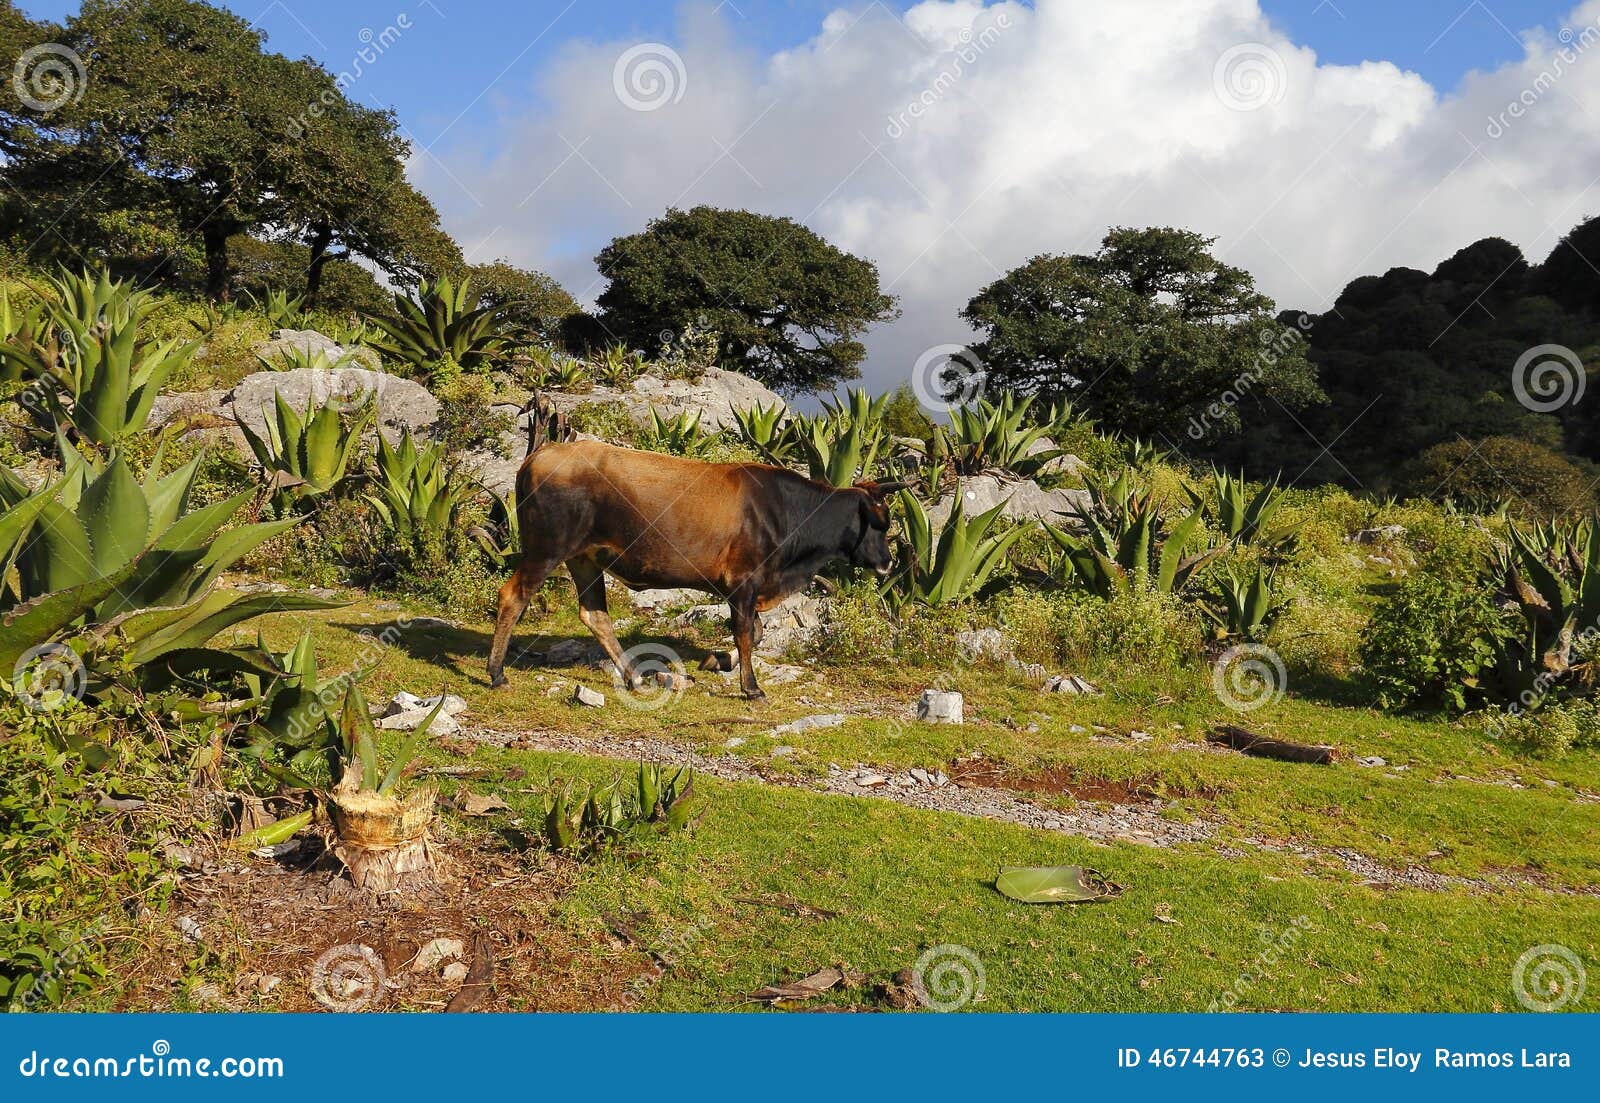 cows, oaks and maguey madrecuishe, nature in san luis potosi, ii